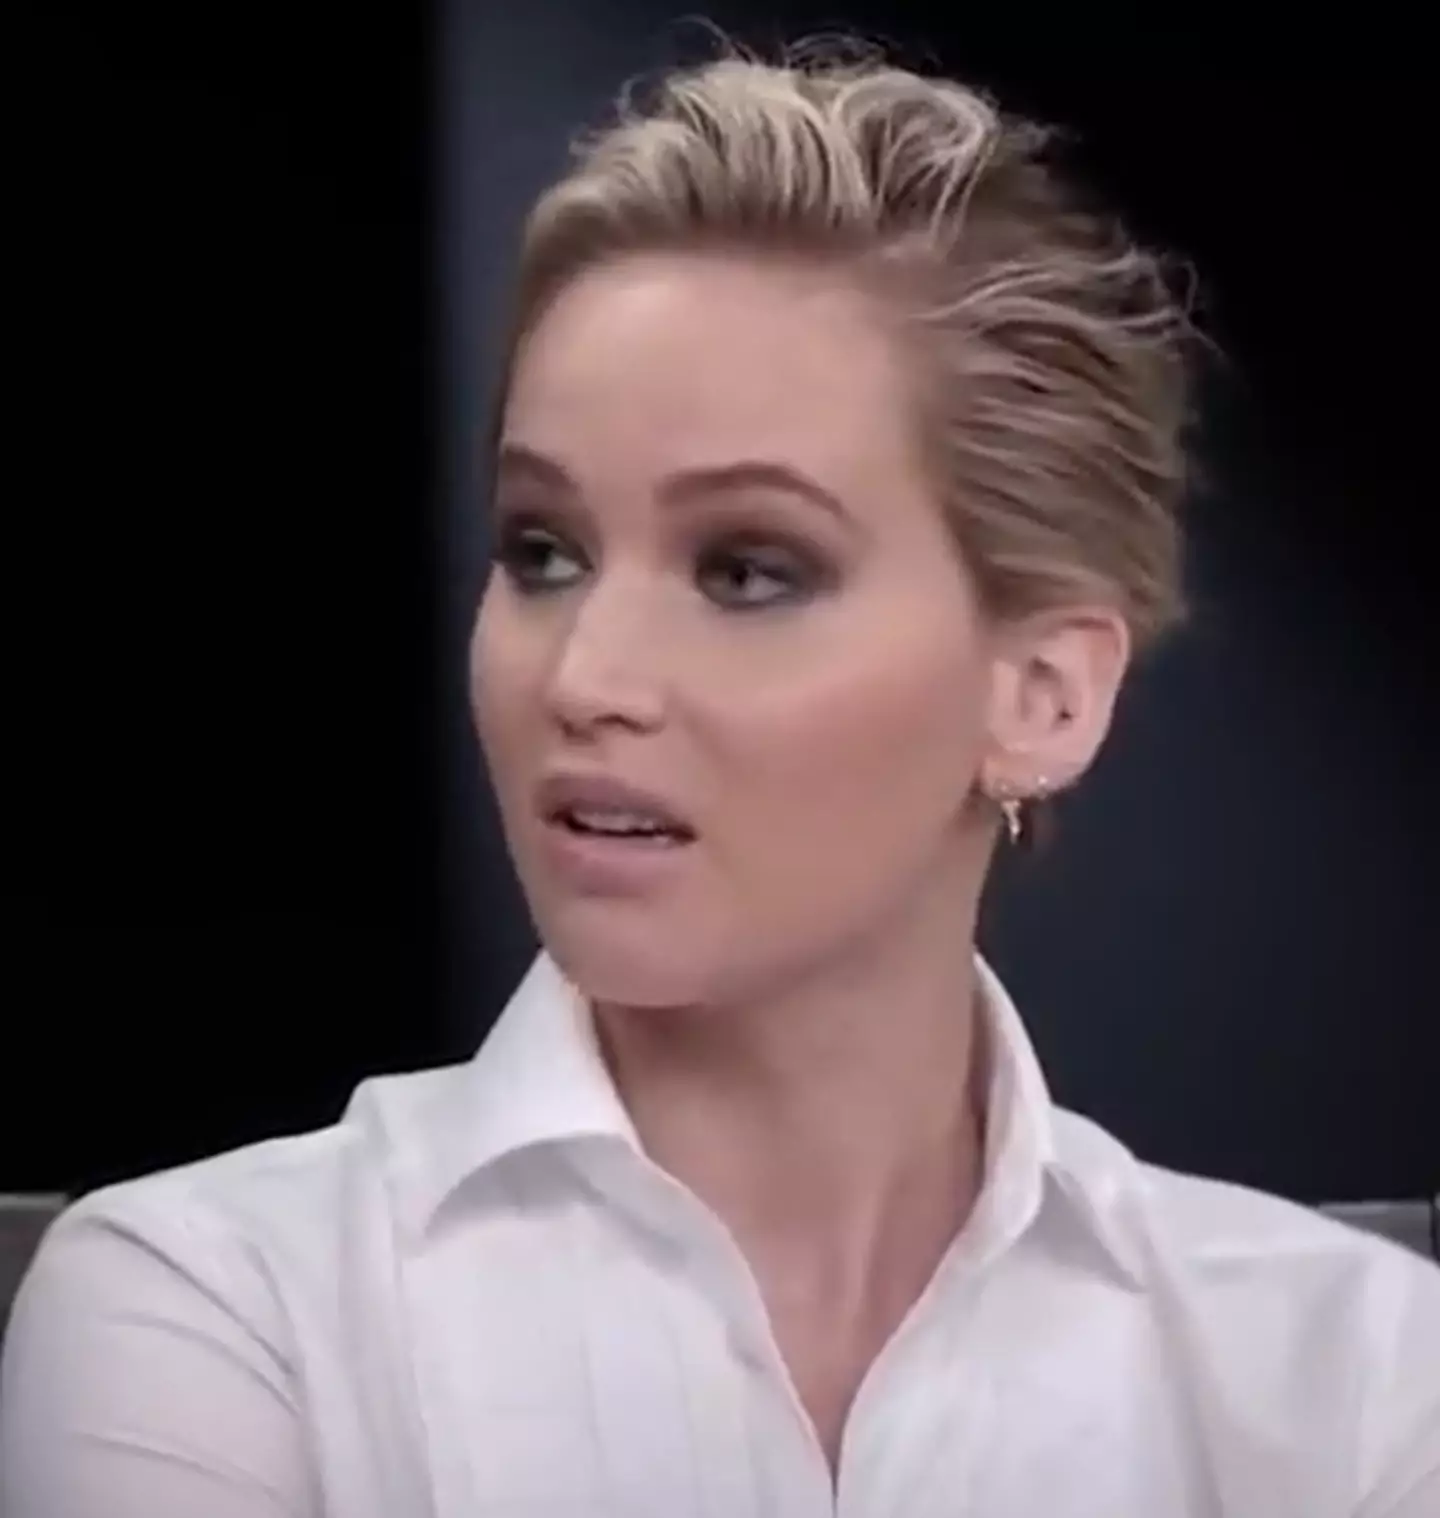 Jennifer Lawrence was on The Hollywood Reporter's Actress Roundtable in 2017 when she described the time a director 'said something f**ked up to me'.